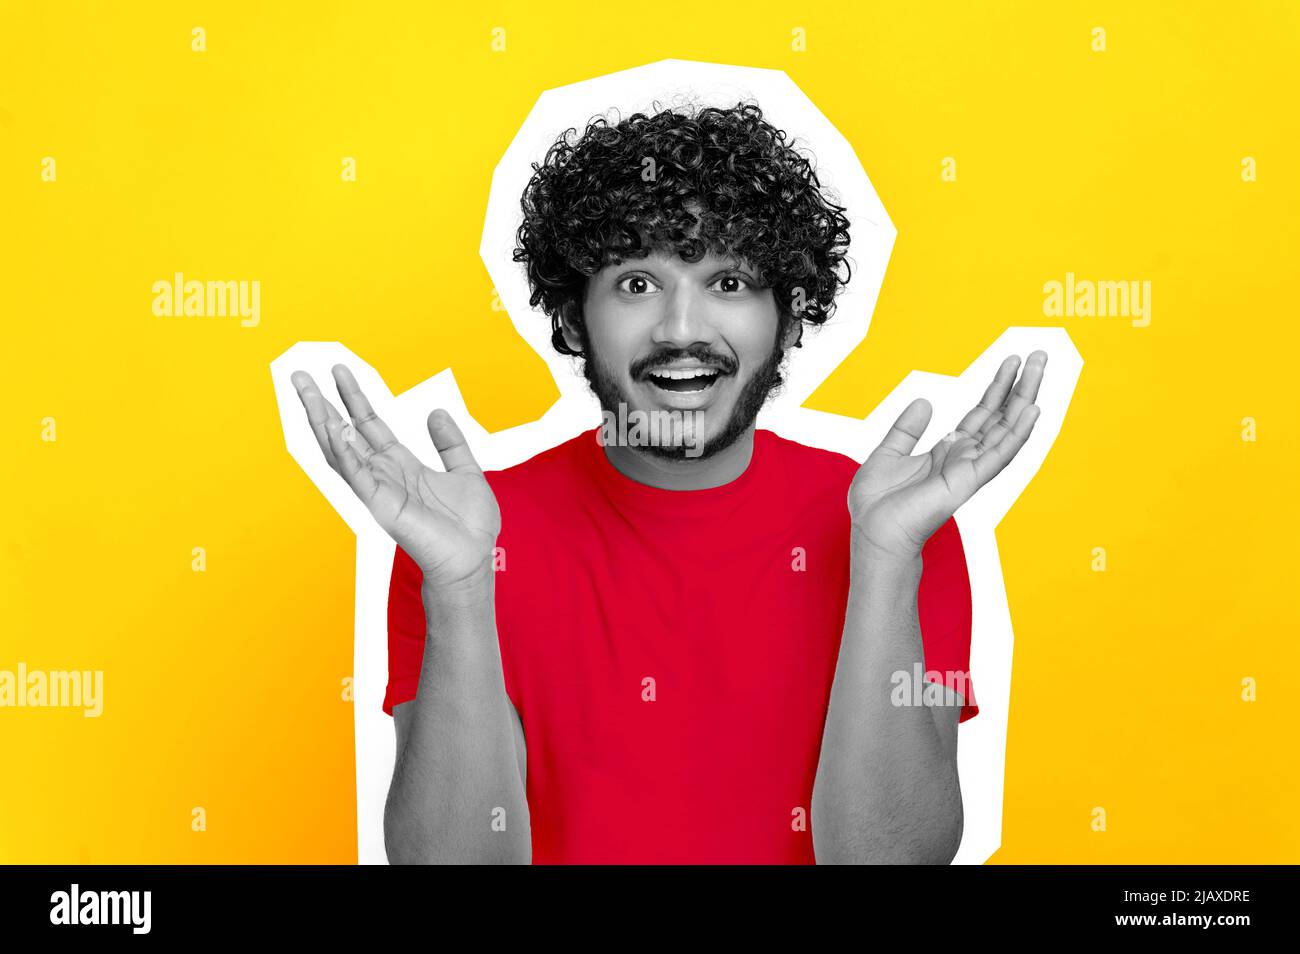 Surprised stunned black and white indian or arabian curly guy, in red t-shirt, looking at camera in disbelief, spreading his arms to the sides, shrugging, stand on isolated orange background. Cut out Stock Photo